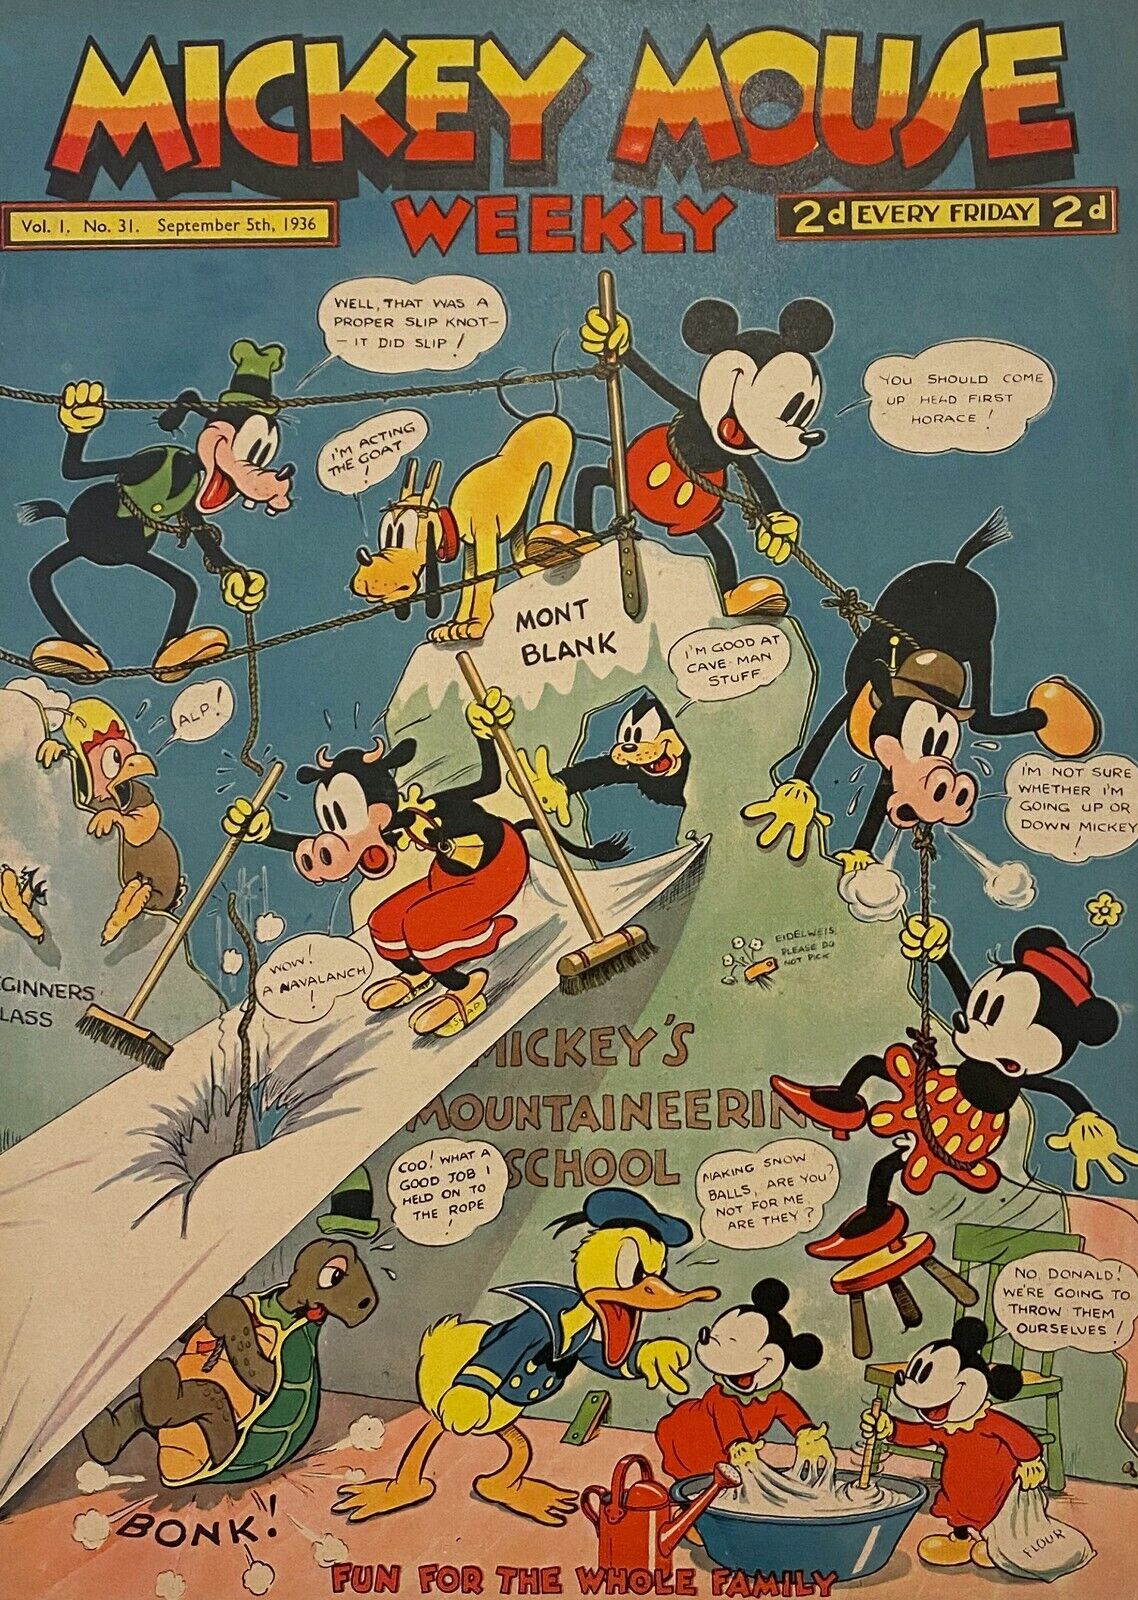 Original Micky Mouse Weekly Vol. 1 No. 31 September 5th, 1936